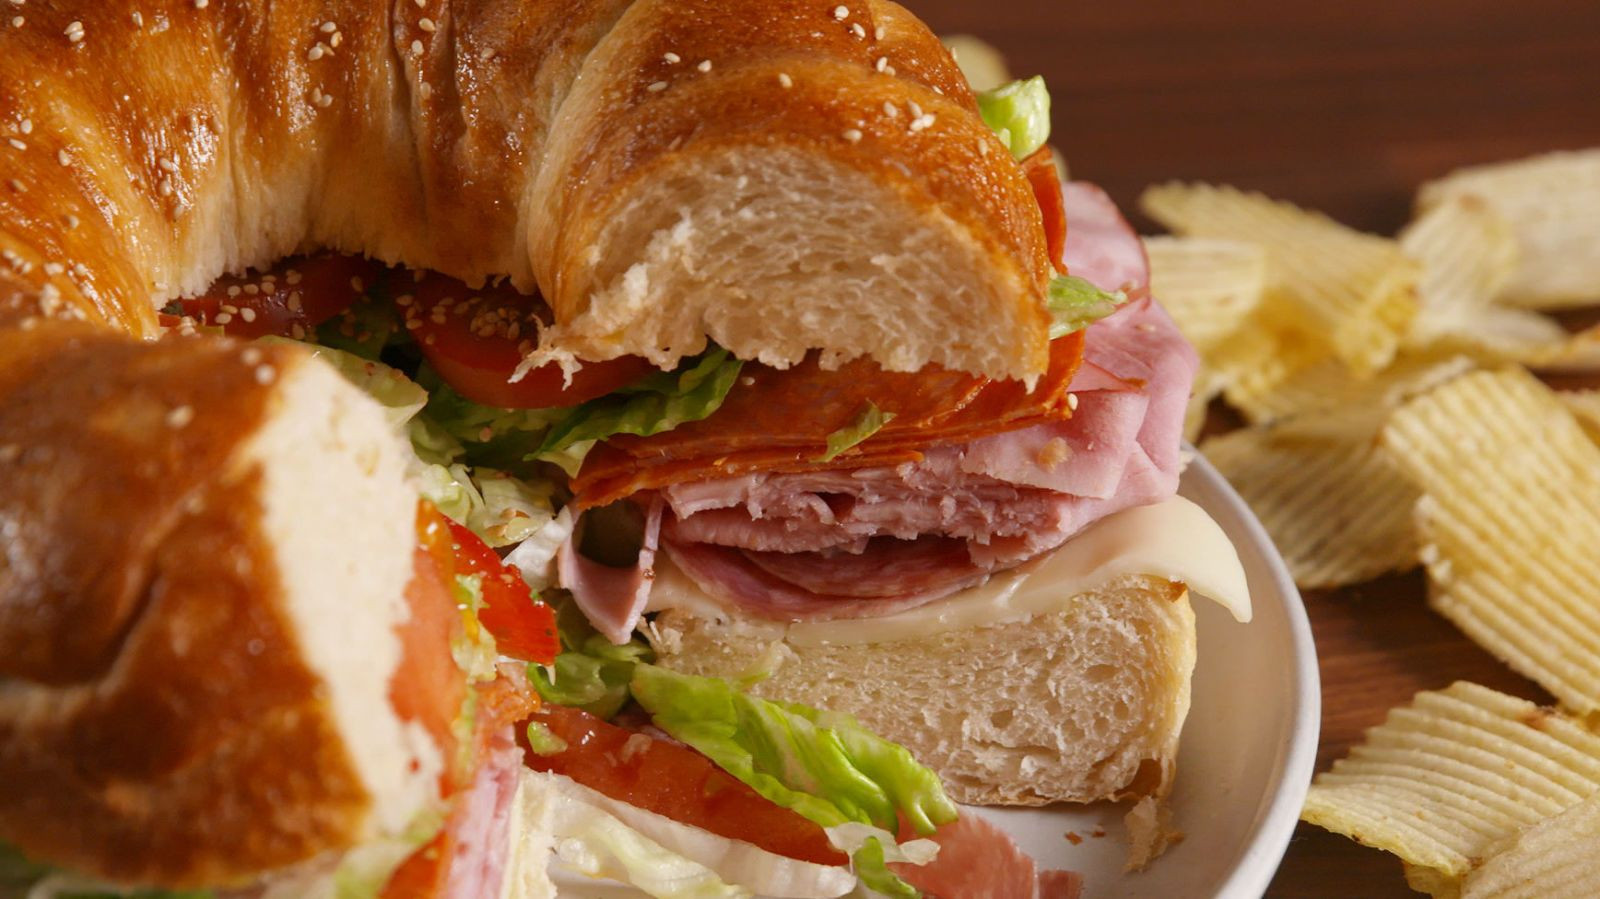 Super Bowl Sandwich Recipes
 This Giant Party Sub Is The Real Winner The Super Bowl